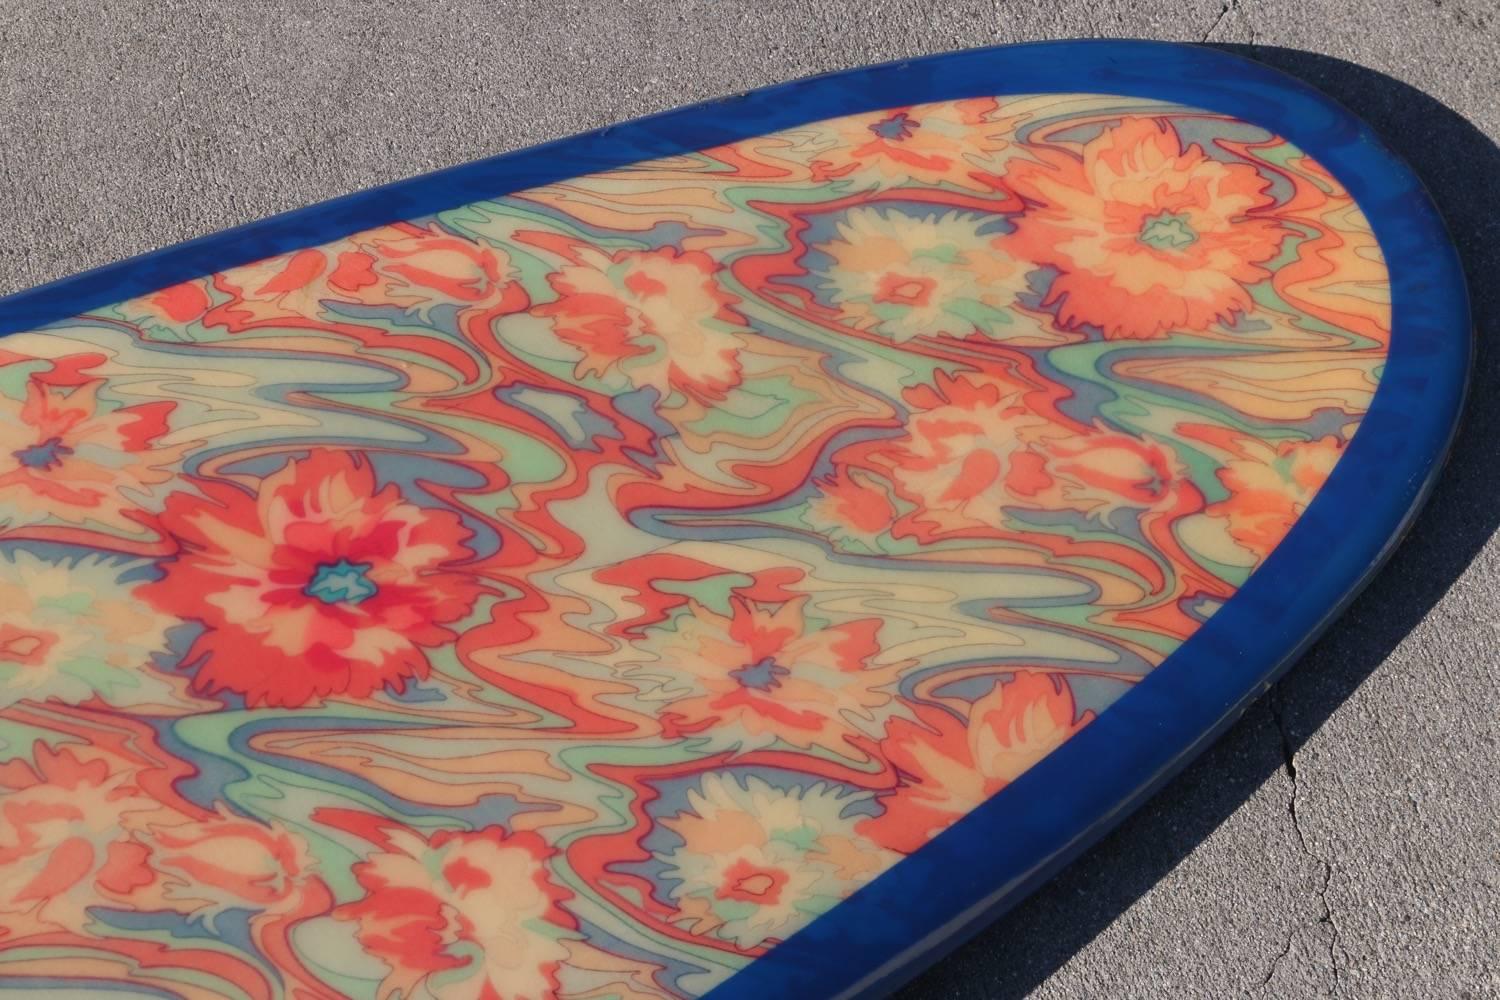 American Original Red Blue Yellow Psychedelic Floral Dextra Surfboard, circa 1965